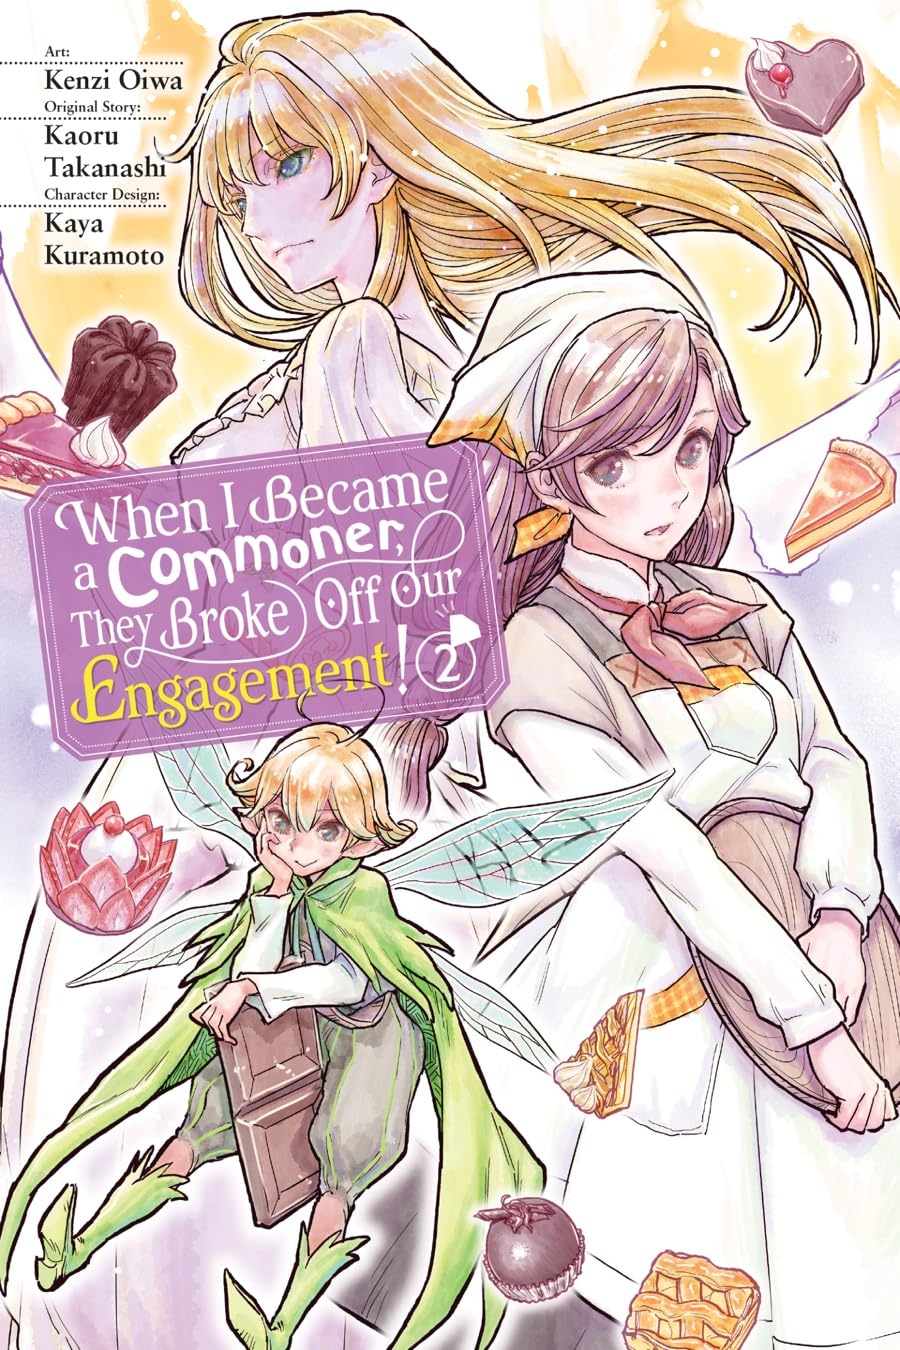 When I Became a Commoner, They Broke Off Our Engagement! Vol. 02